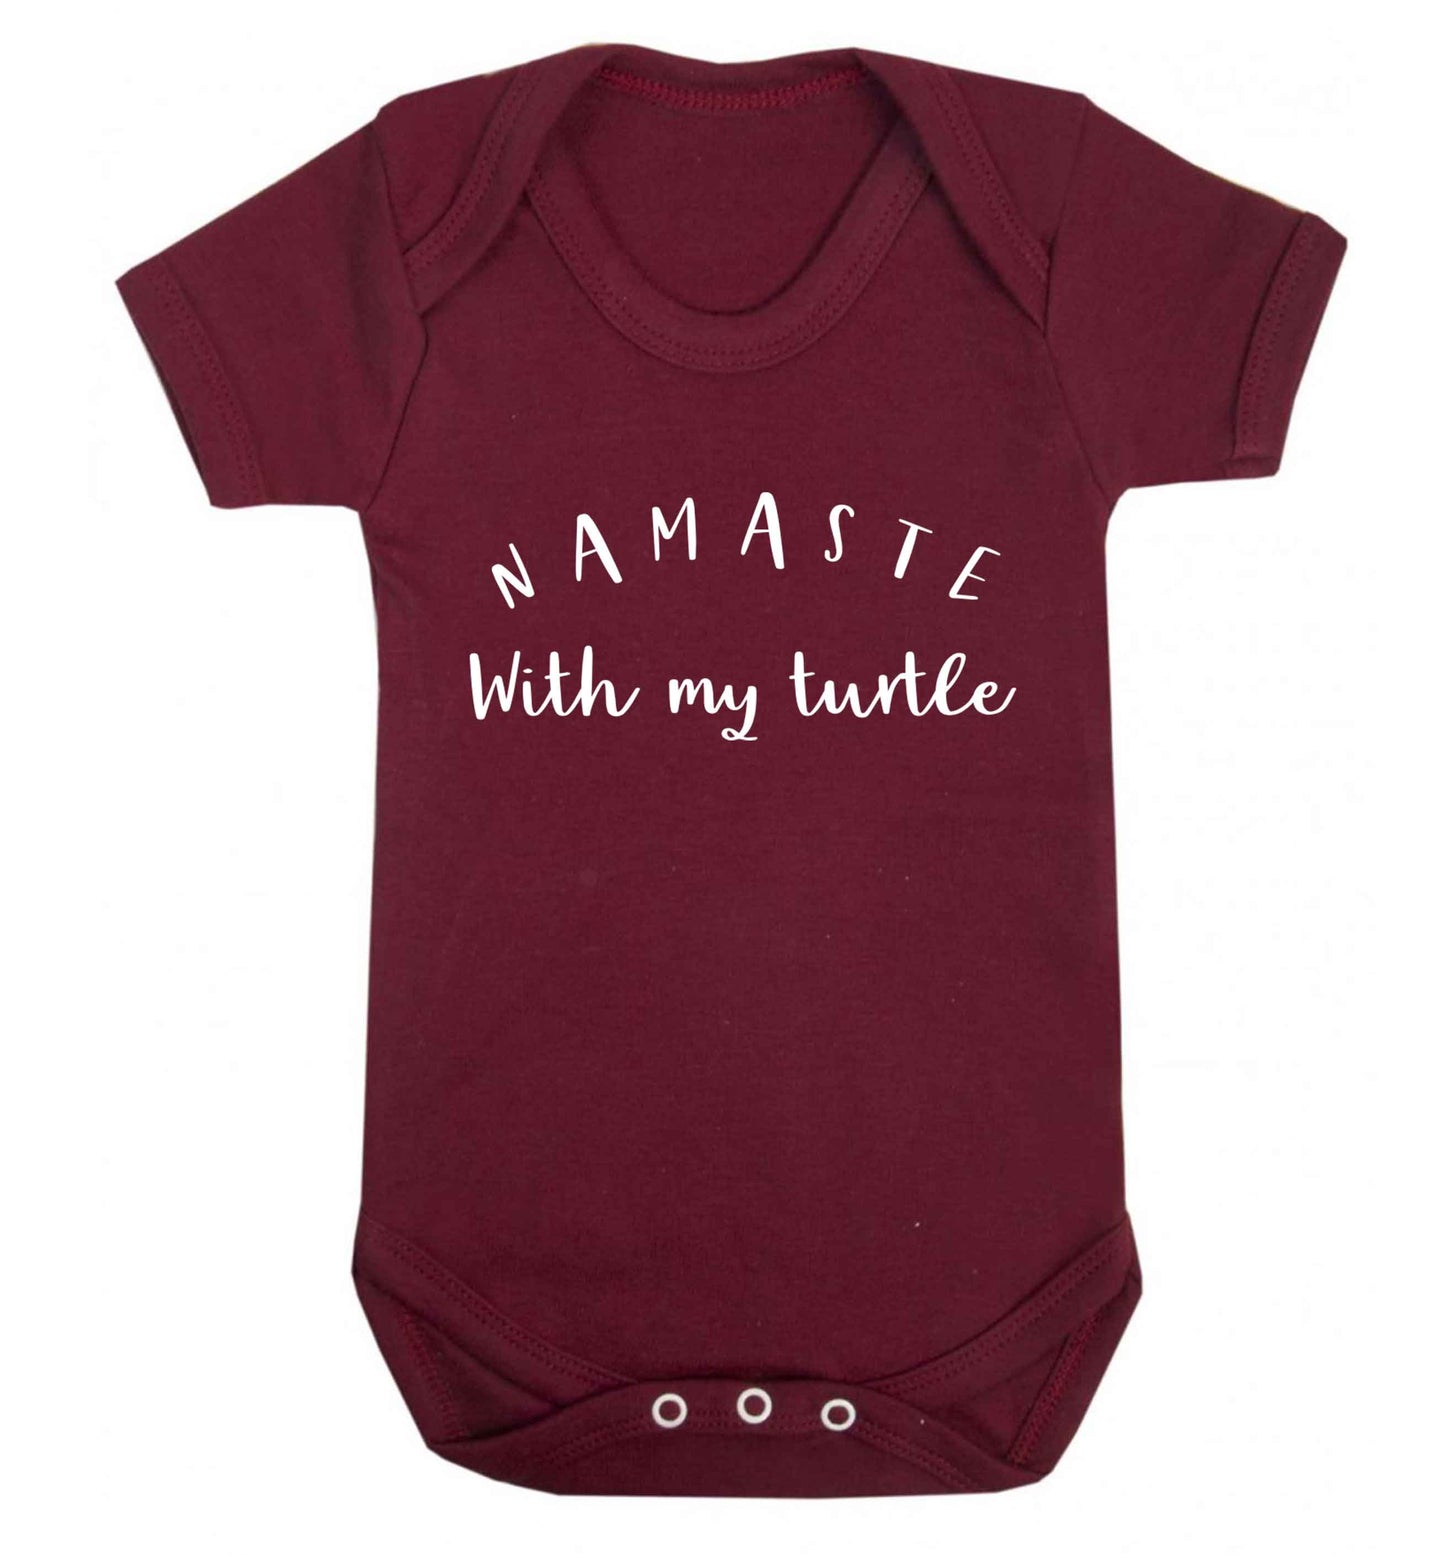 Namaste with my turtle Baby Vest maroon 18-24 months